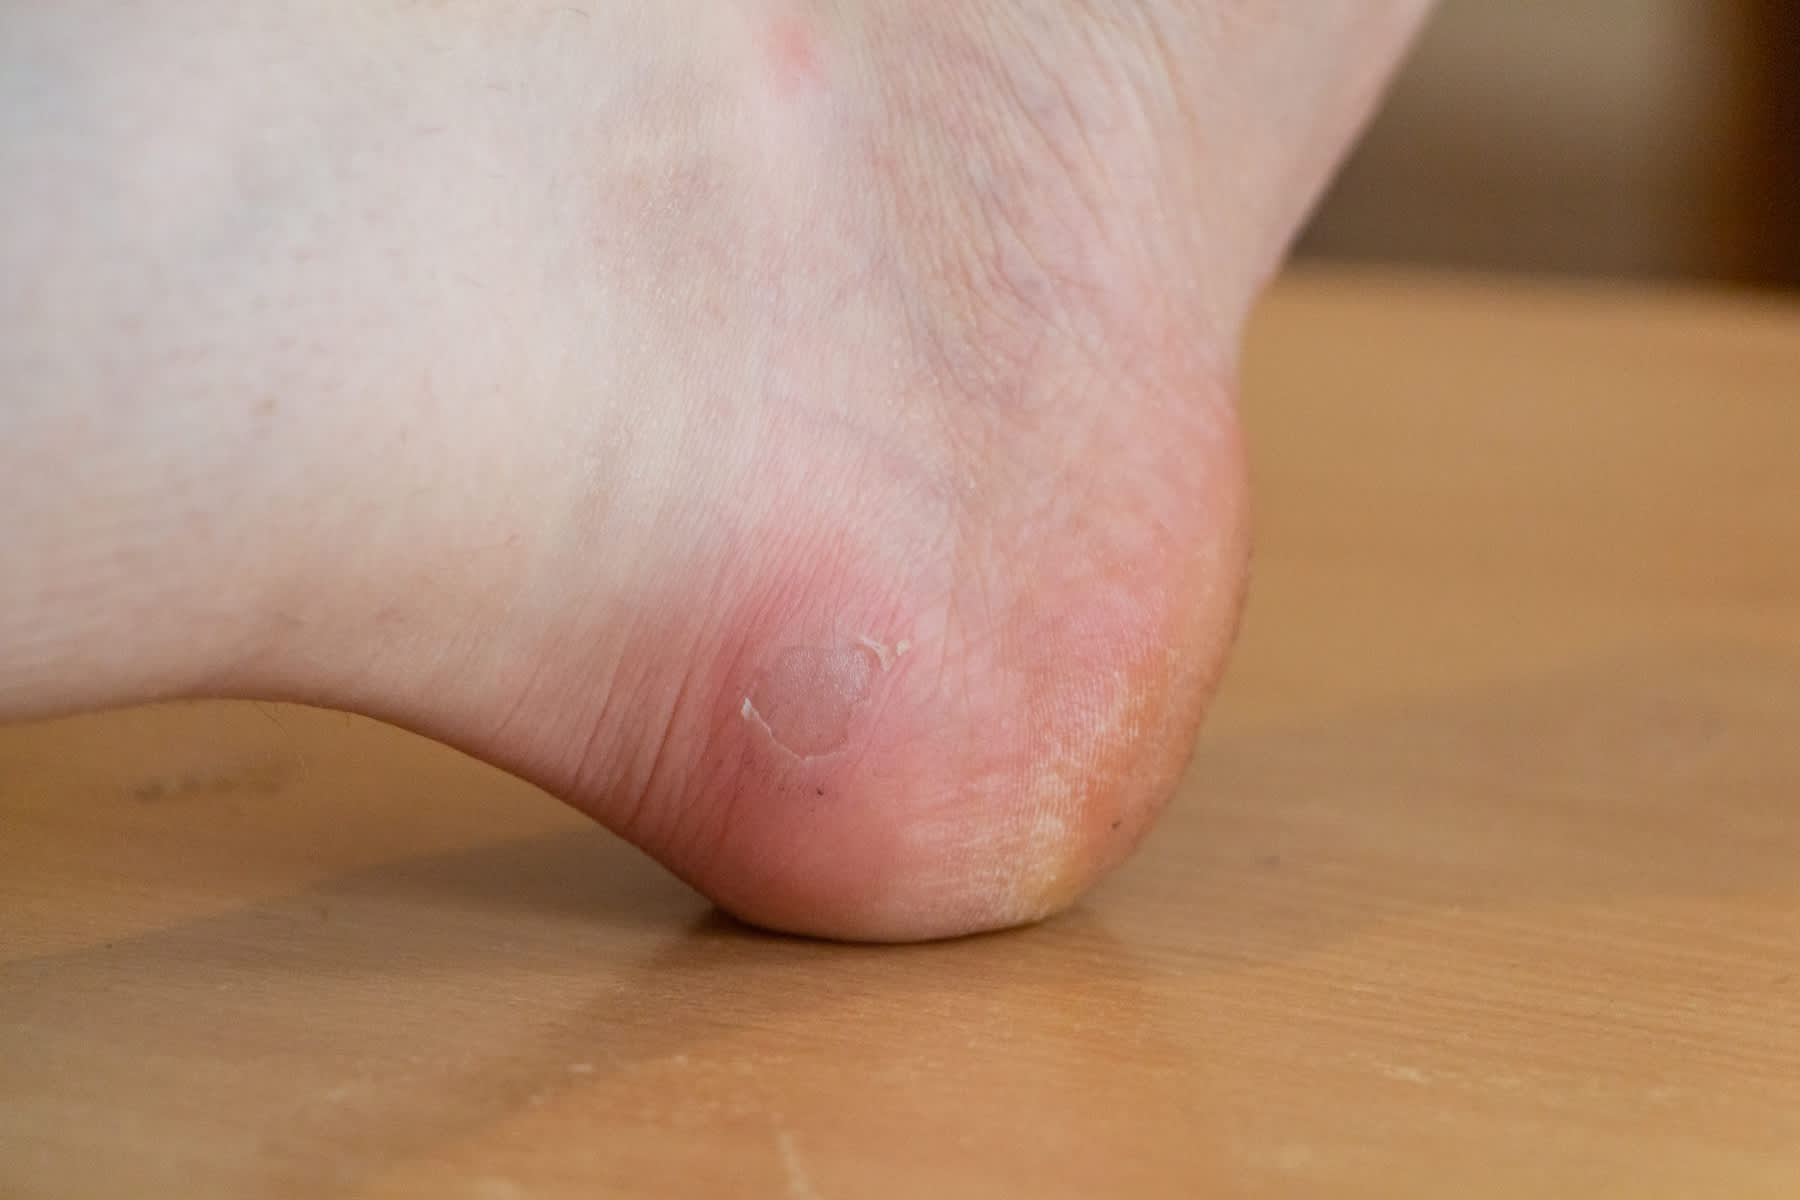 In the image is a blister on the side of the heel. There is redness around the blister.